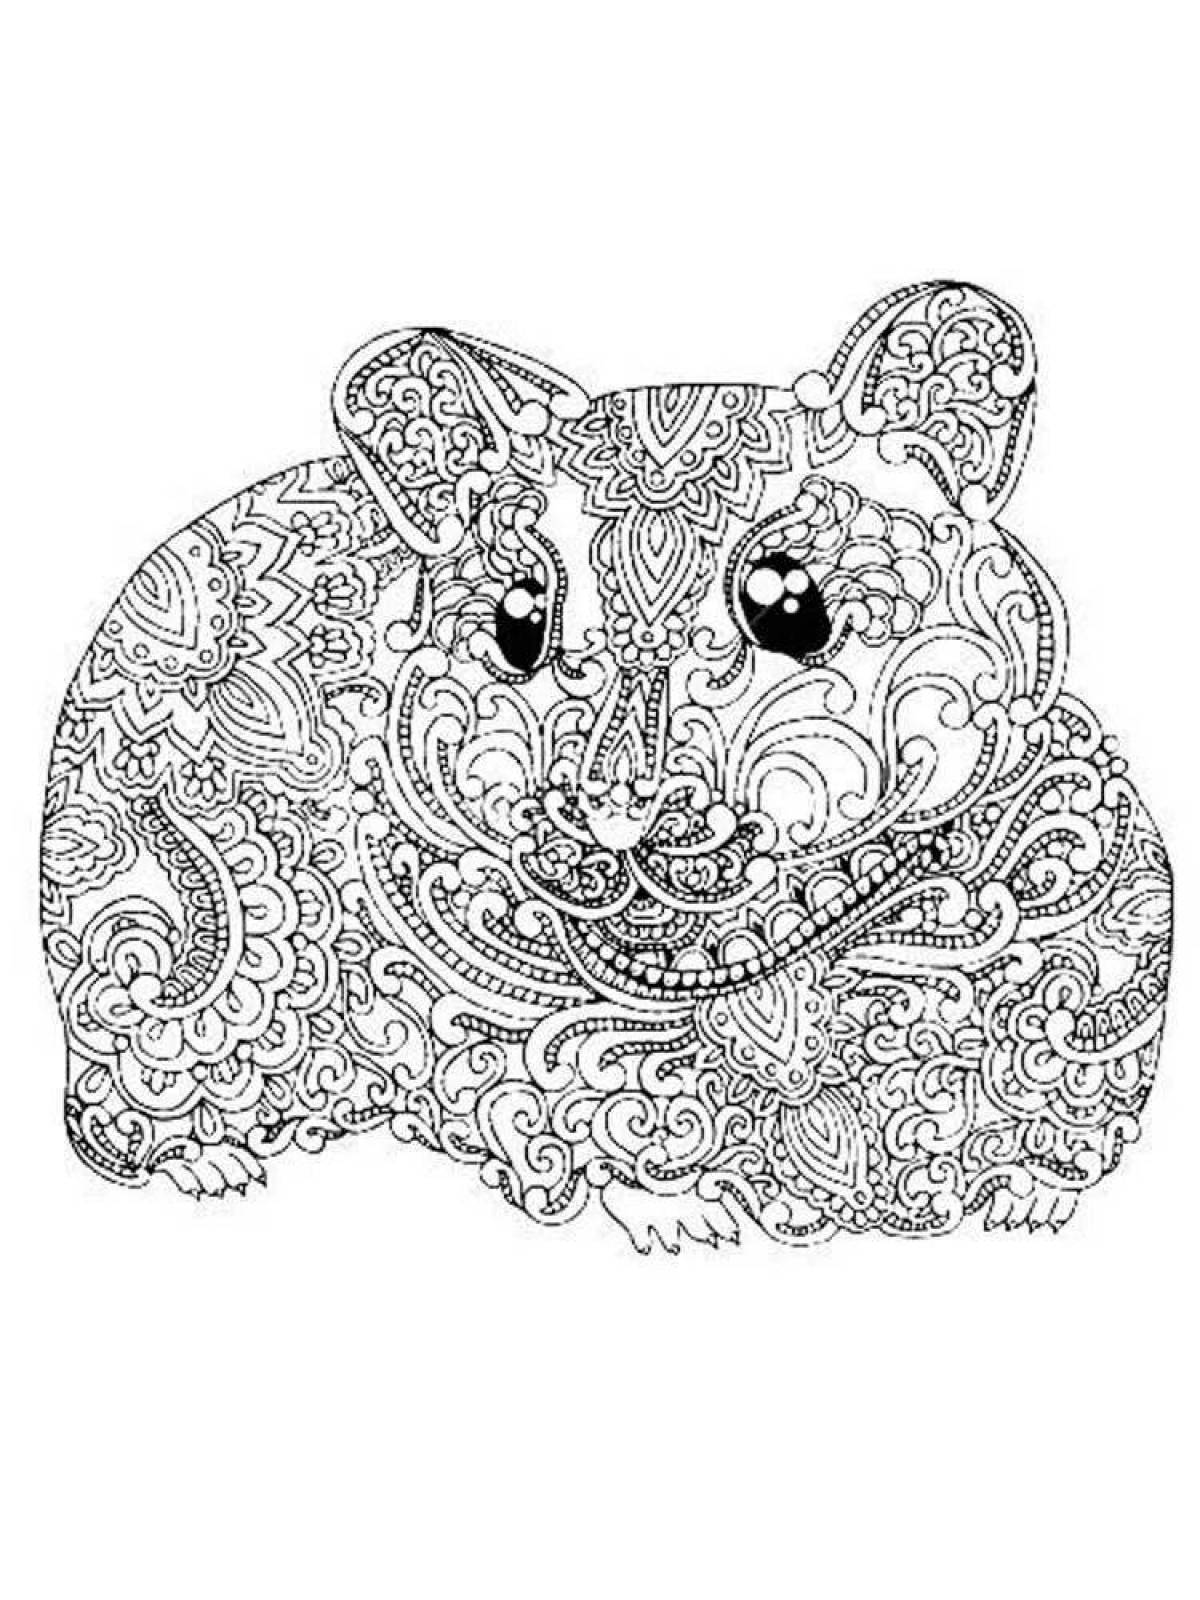 Relaxing coloring hamster antistress